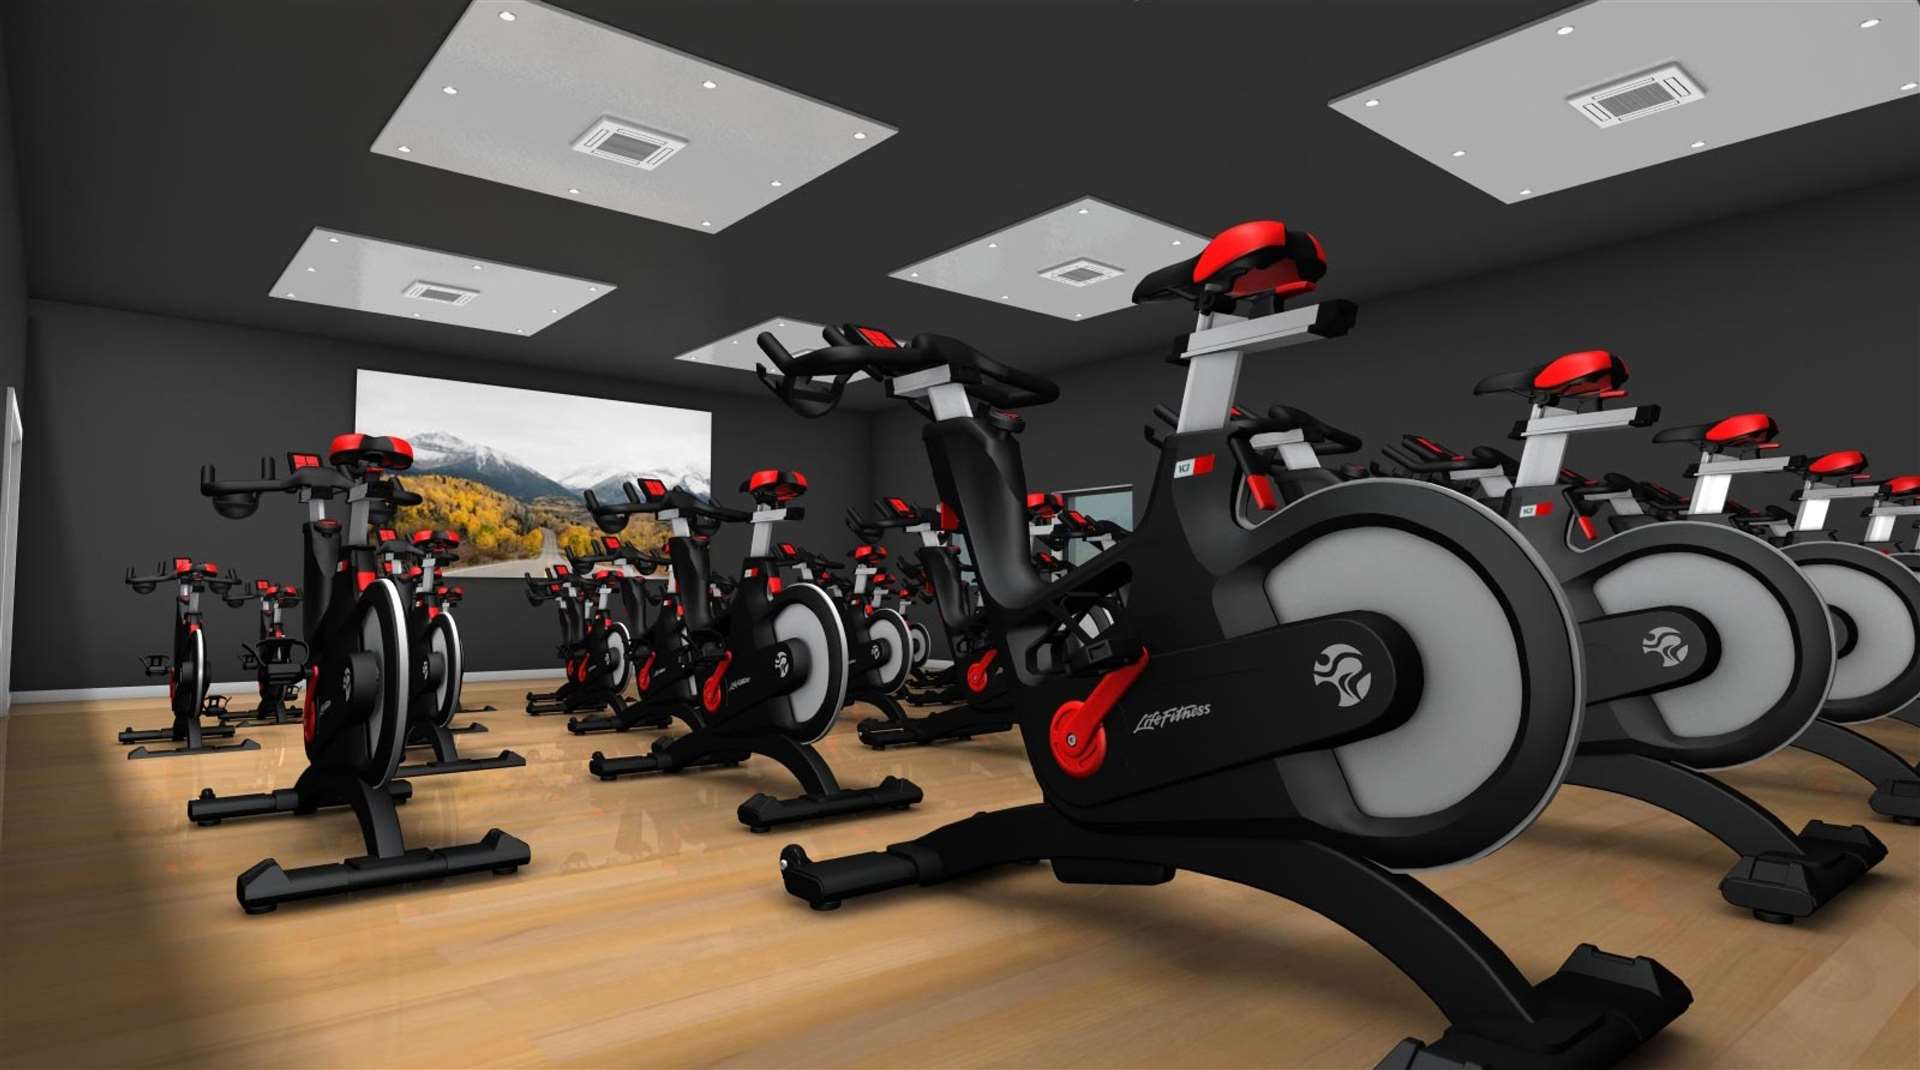 New fitness studios will be built at Kingsmead